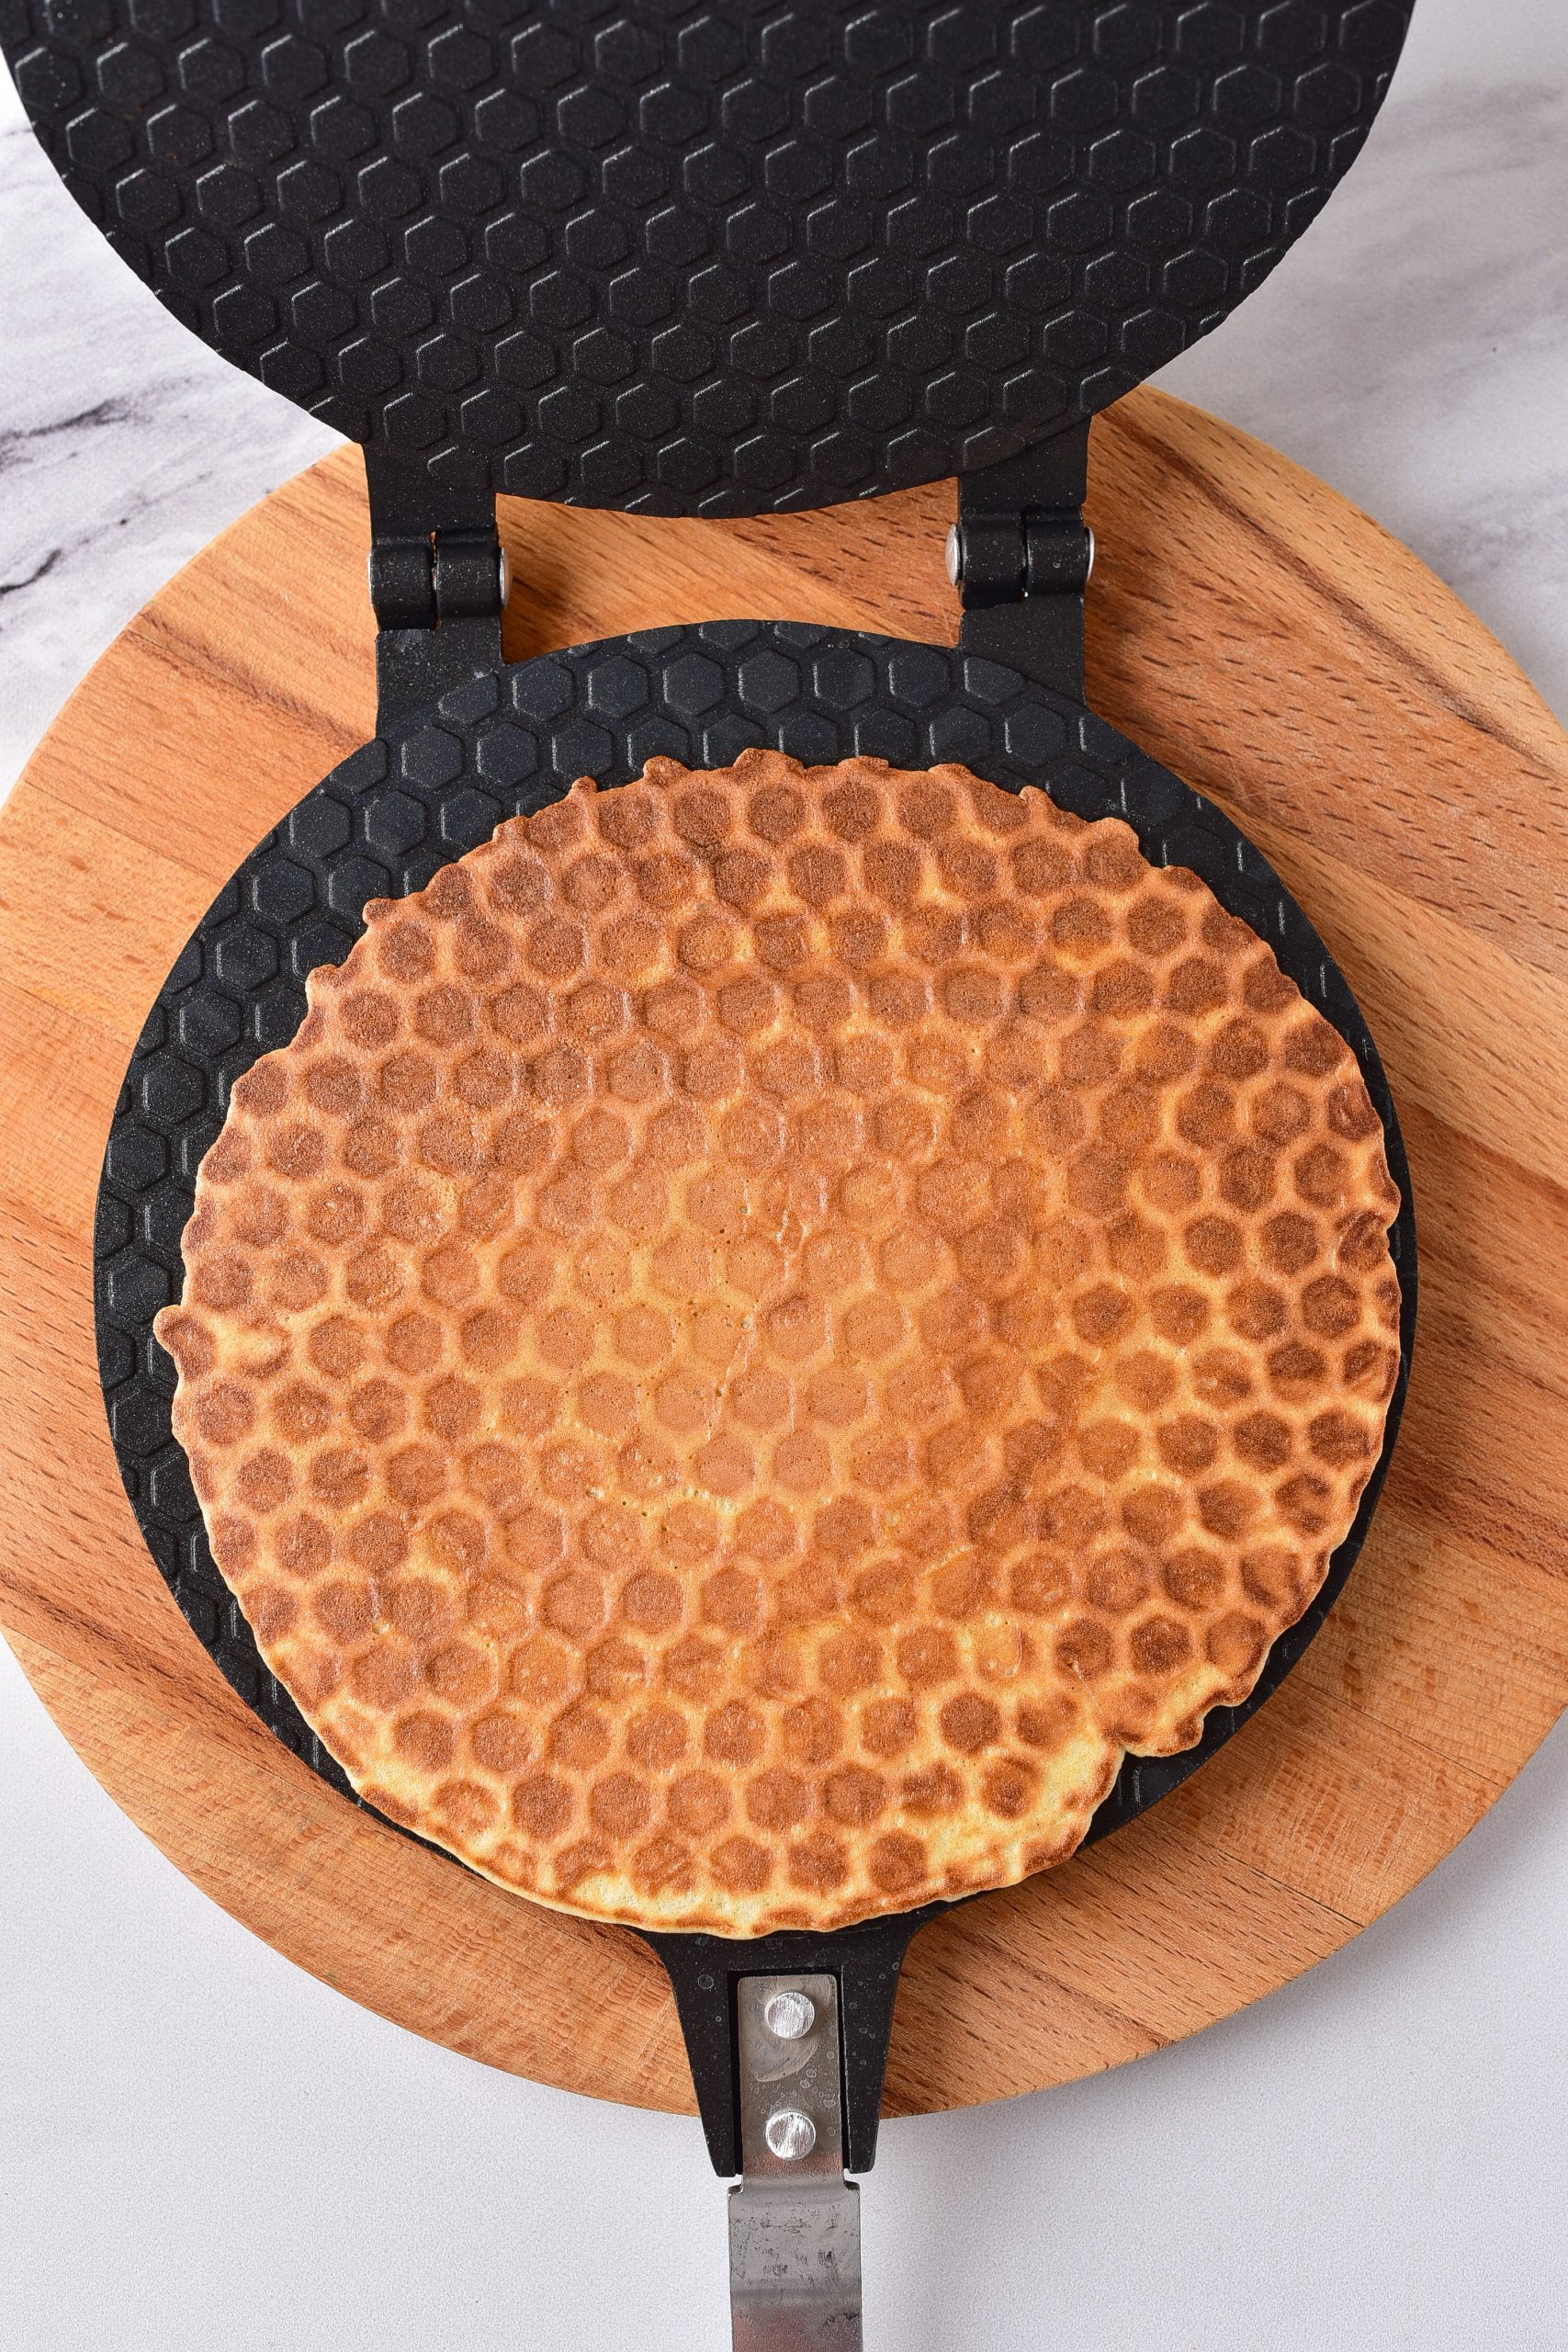 Spread a ¼ cup of the batter into a heated waffle iron, and cook on medium until slightly browned.